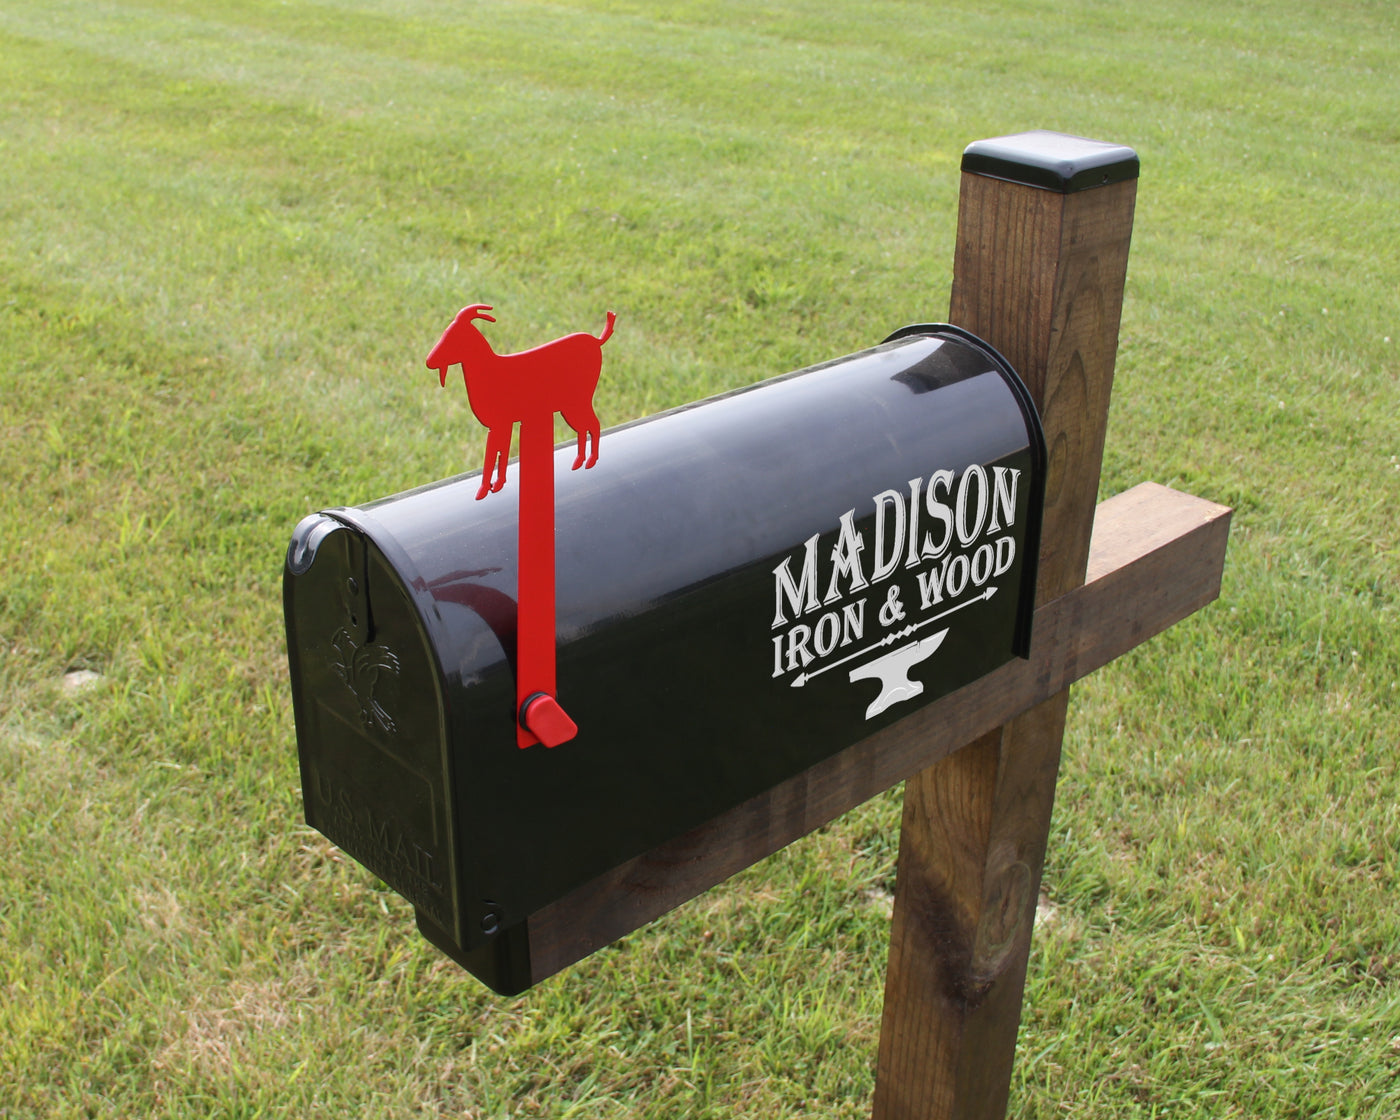 Goat Mailbox Flag - Madison Iron and Wood - Mailbox Post Decor - metal outdoor decor - Steel deocrations - american made products - veteran owned business products - fencing decorations - fencing supplies - custom wall decorations - personalized wall signs - steel - decorative post caps - steel post caps - metal post caps - brackets - structural brackets - home improvement - easter - easter decorations - easter gift - easter yard decor